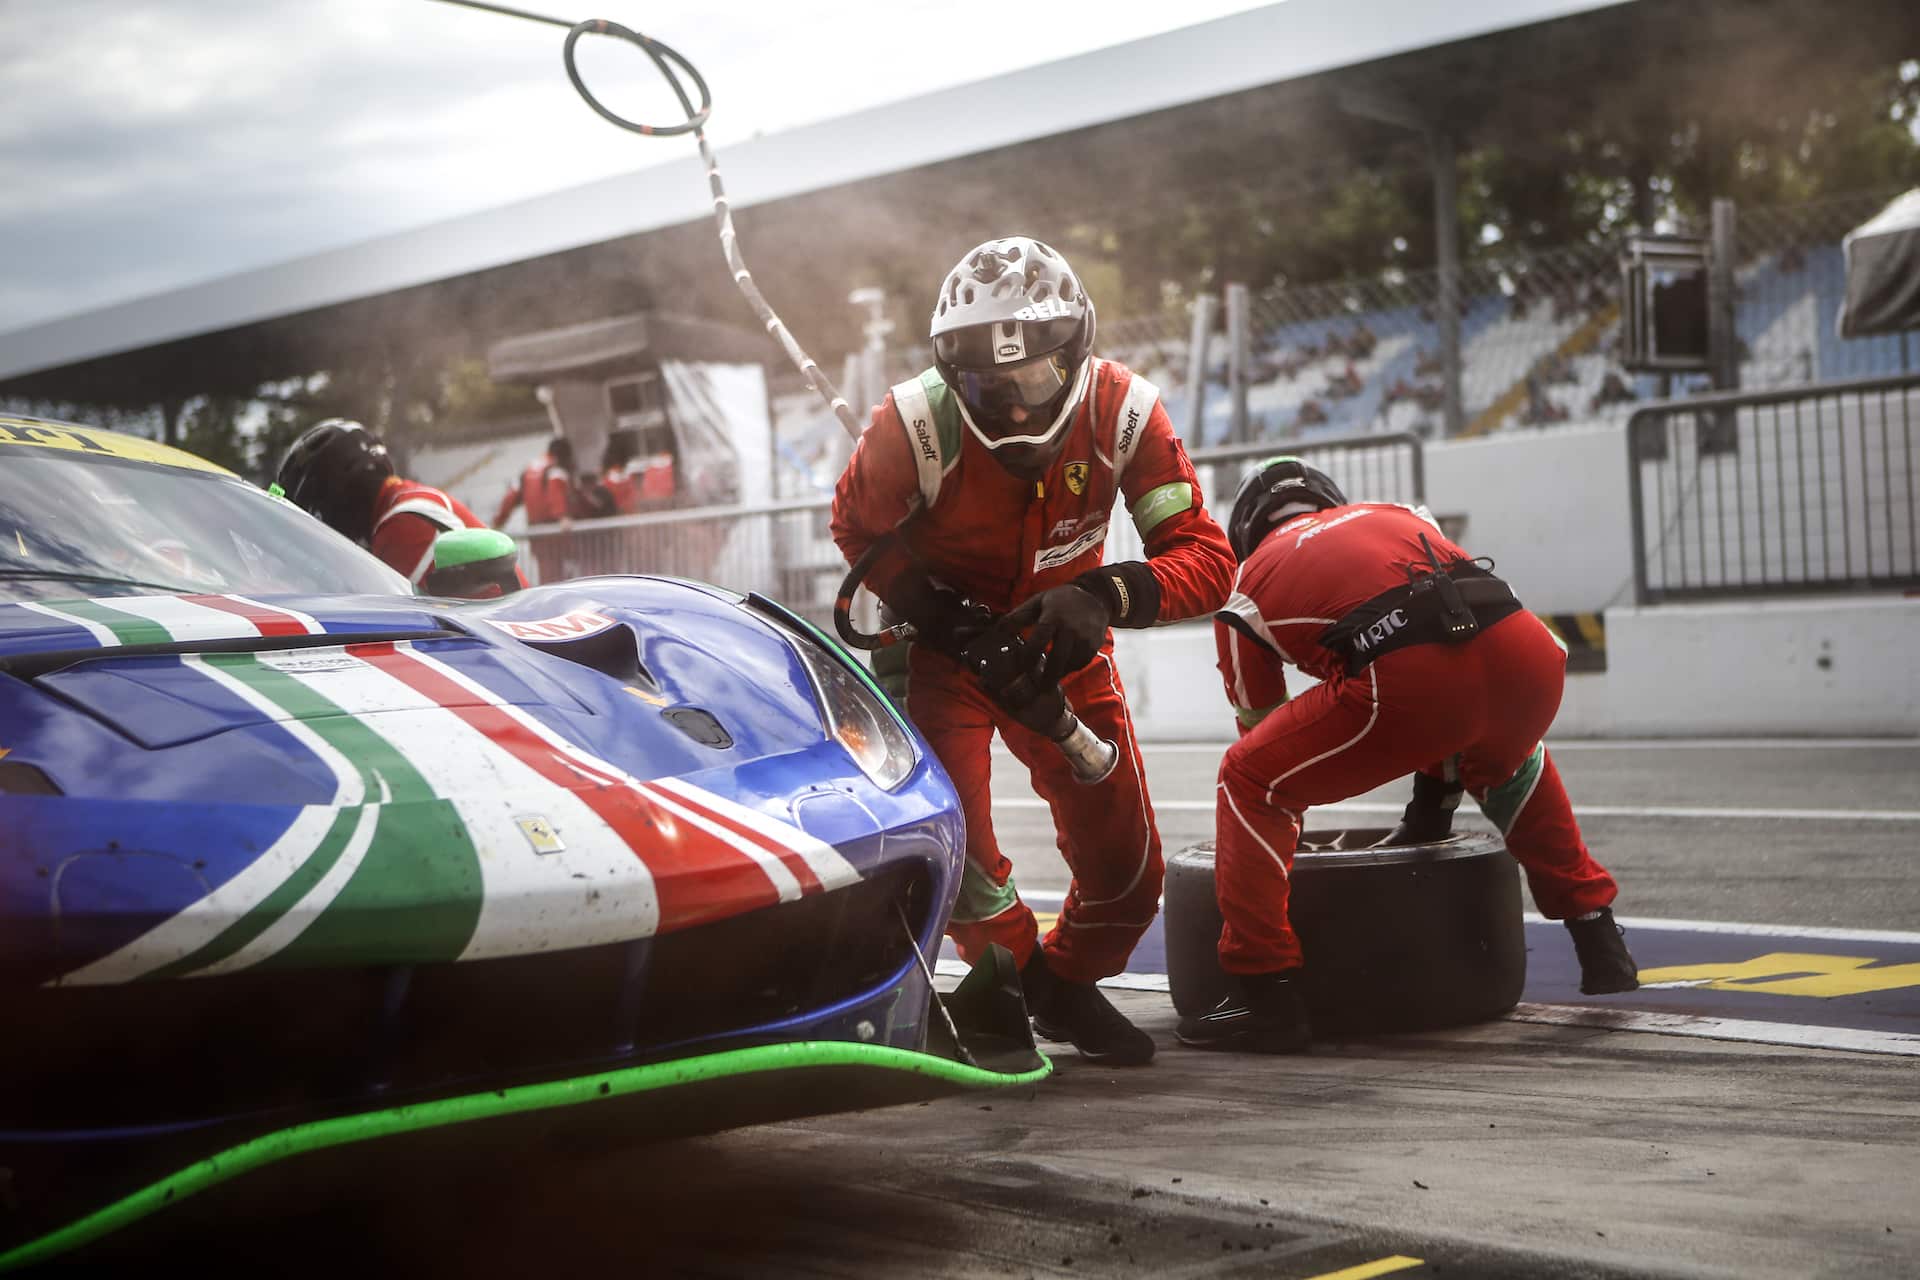 Welcome to the world of FIA World Endurance Championship hypercars